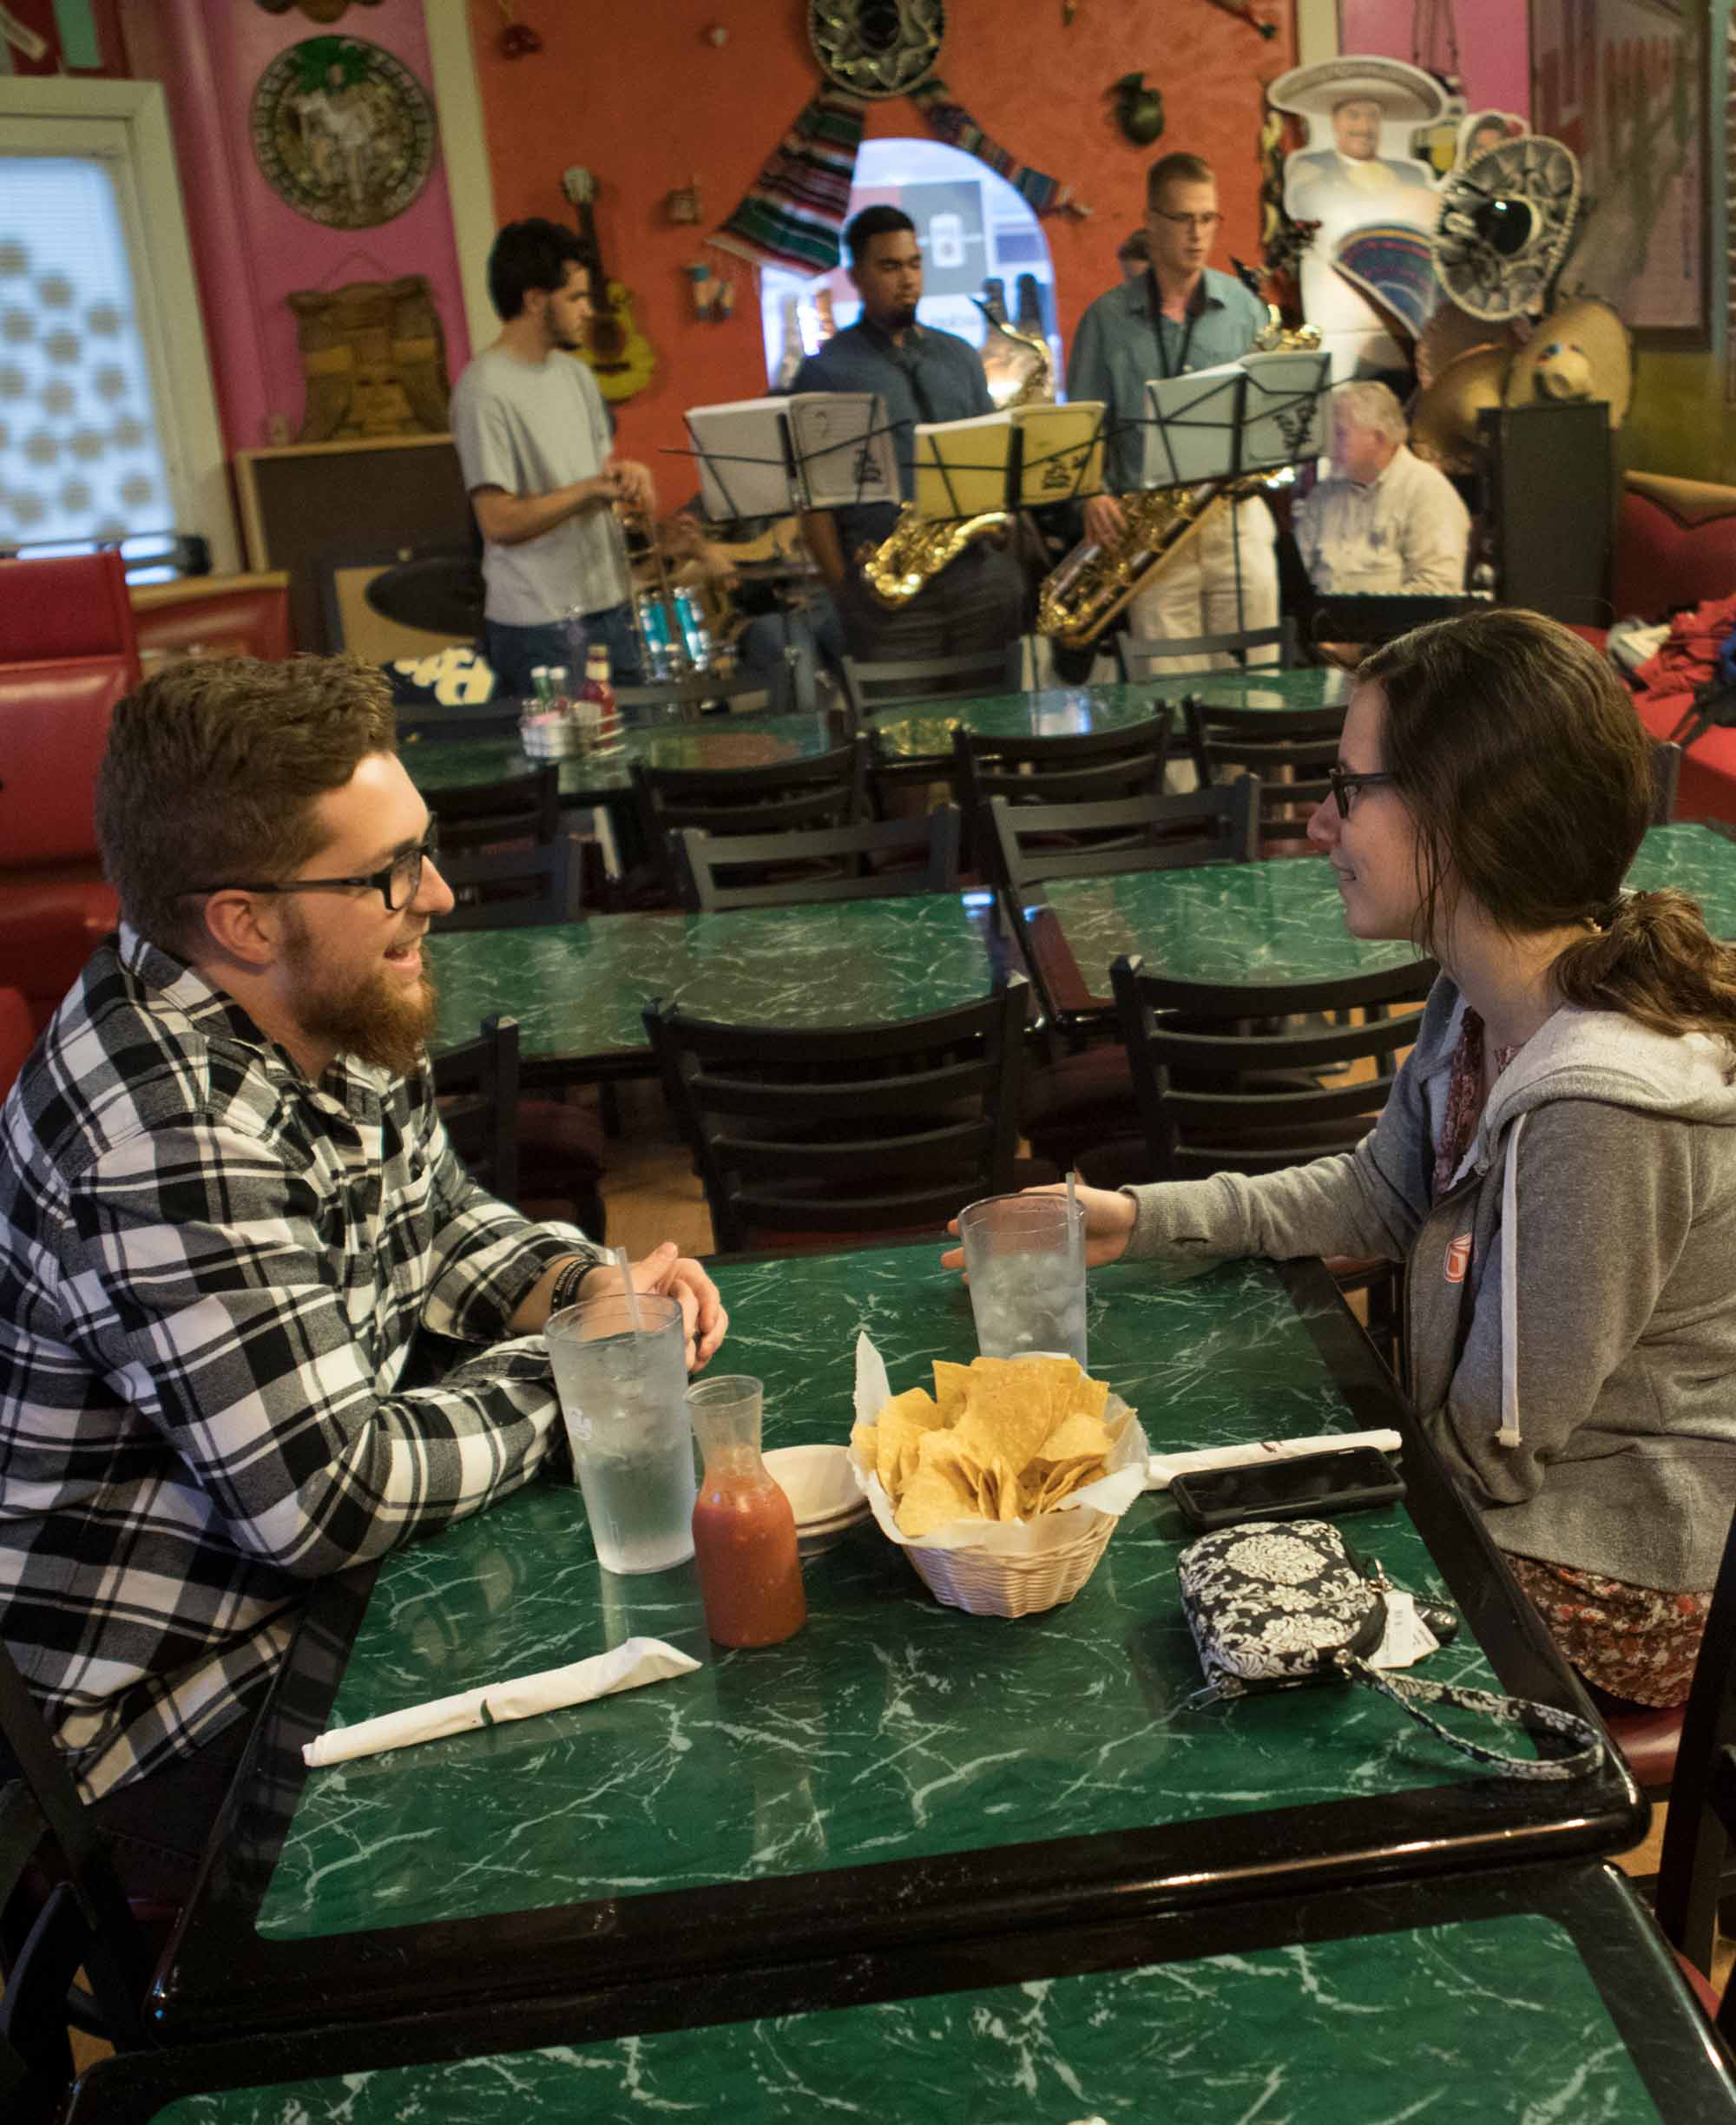 Ohio Northern University seniors Austin Douglas and Tyler Overy listen to a performance. Weekly jam sessions at El Campo Mexican Restaurant & Cantina in Ada are led by Gene Parker, adjunct professor of jazz at Ohio Northern University.